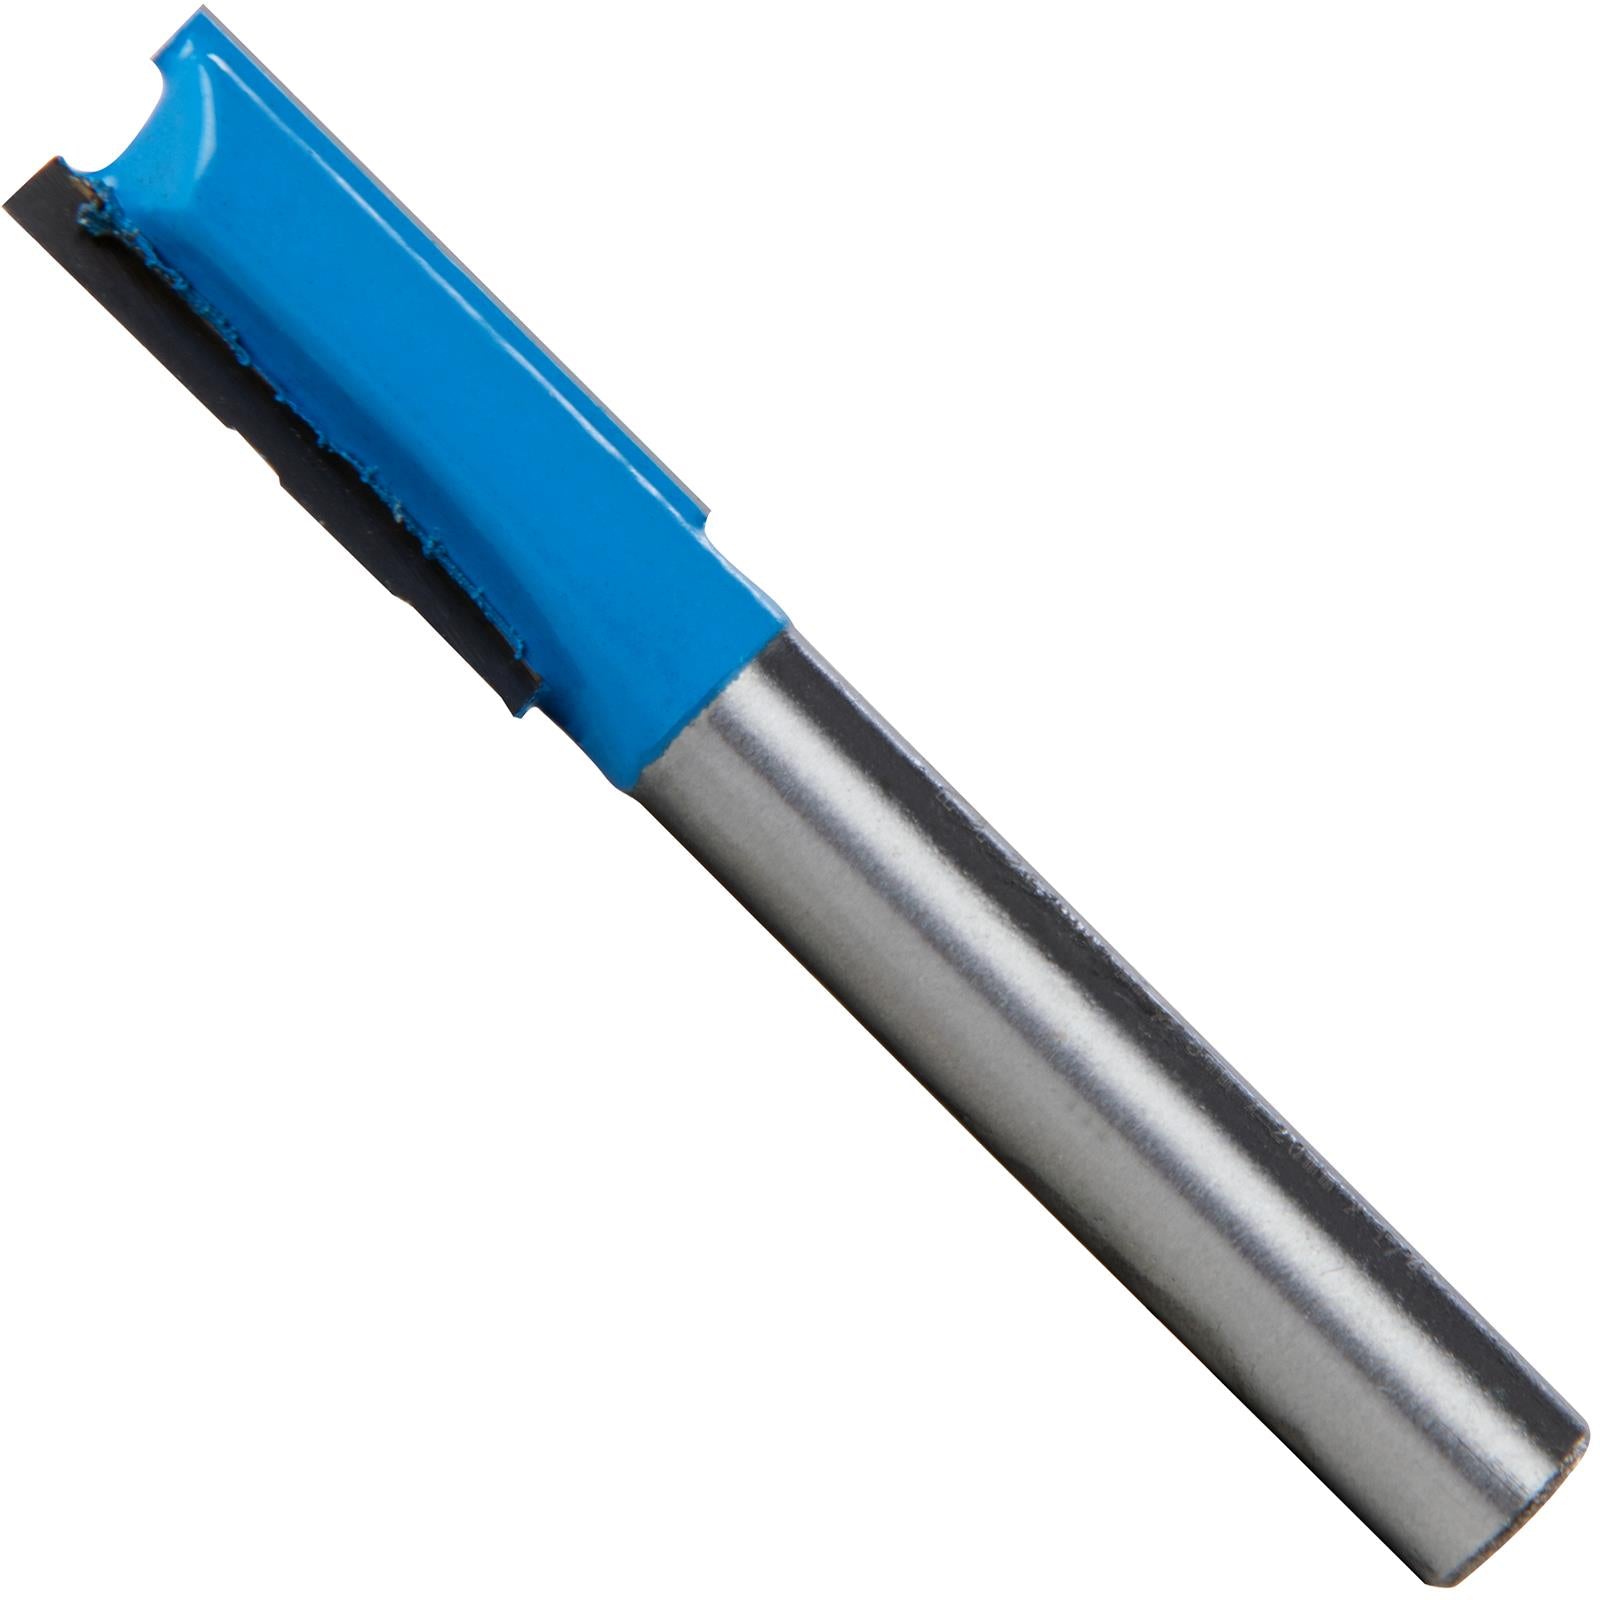 Silverline 1/4" TCT Straight Metric Cutters